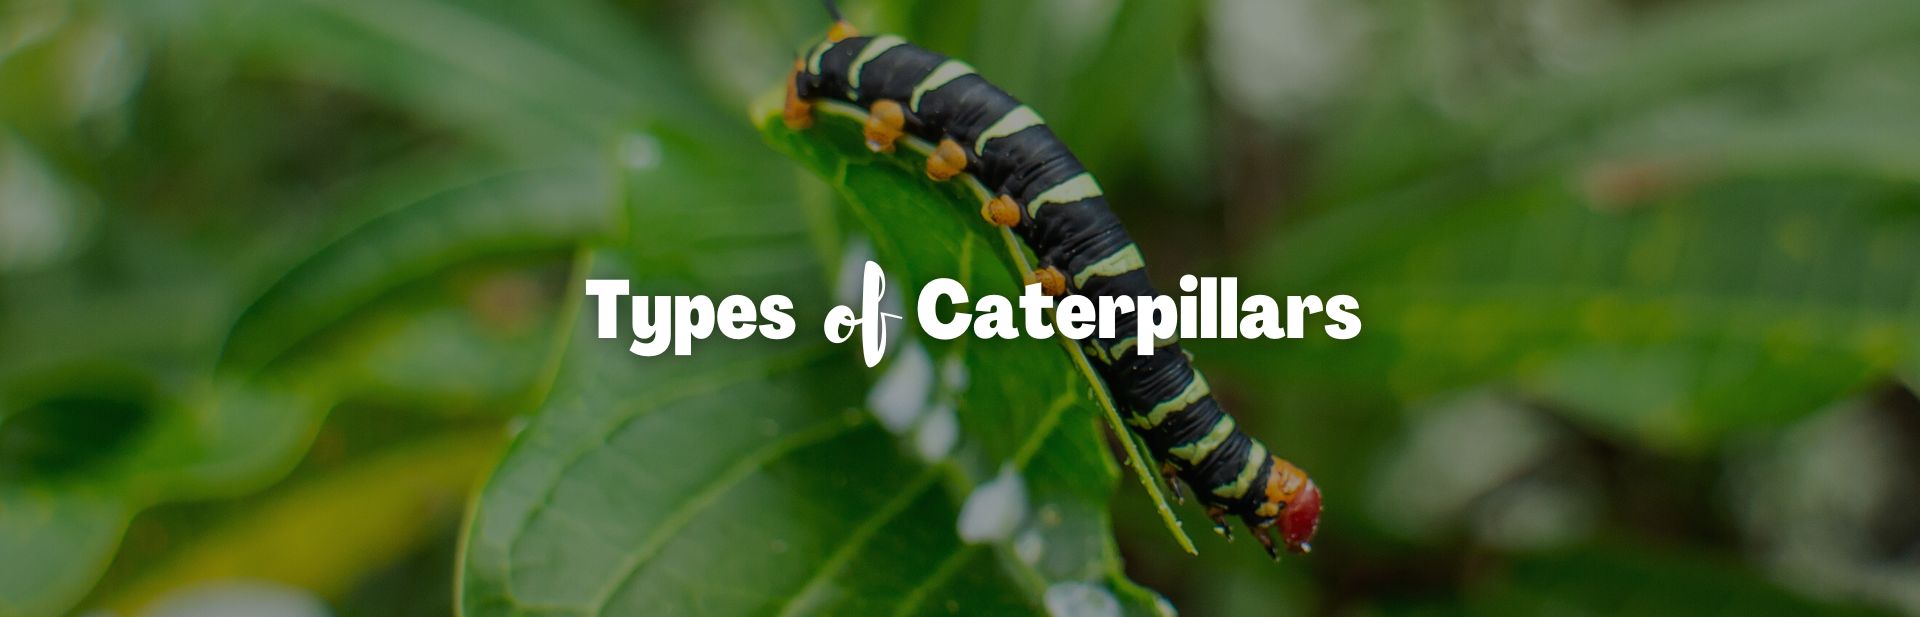 33 Types of Caterpillars: From the Fuzziest to the Spikiest (Names, Pictures, Facts)